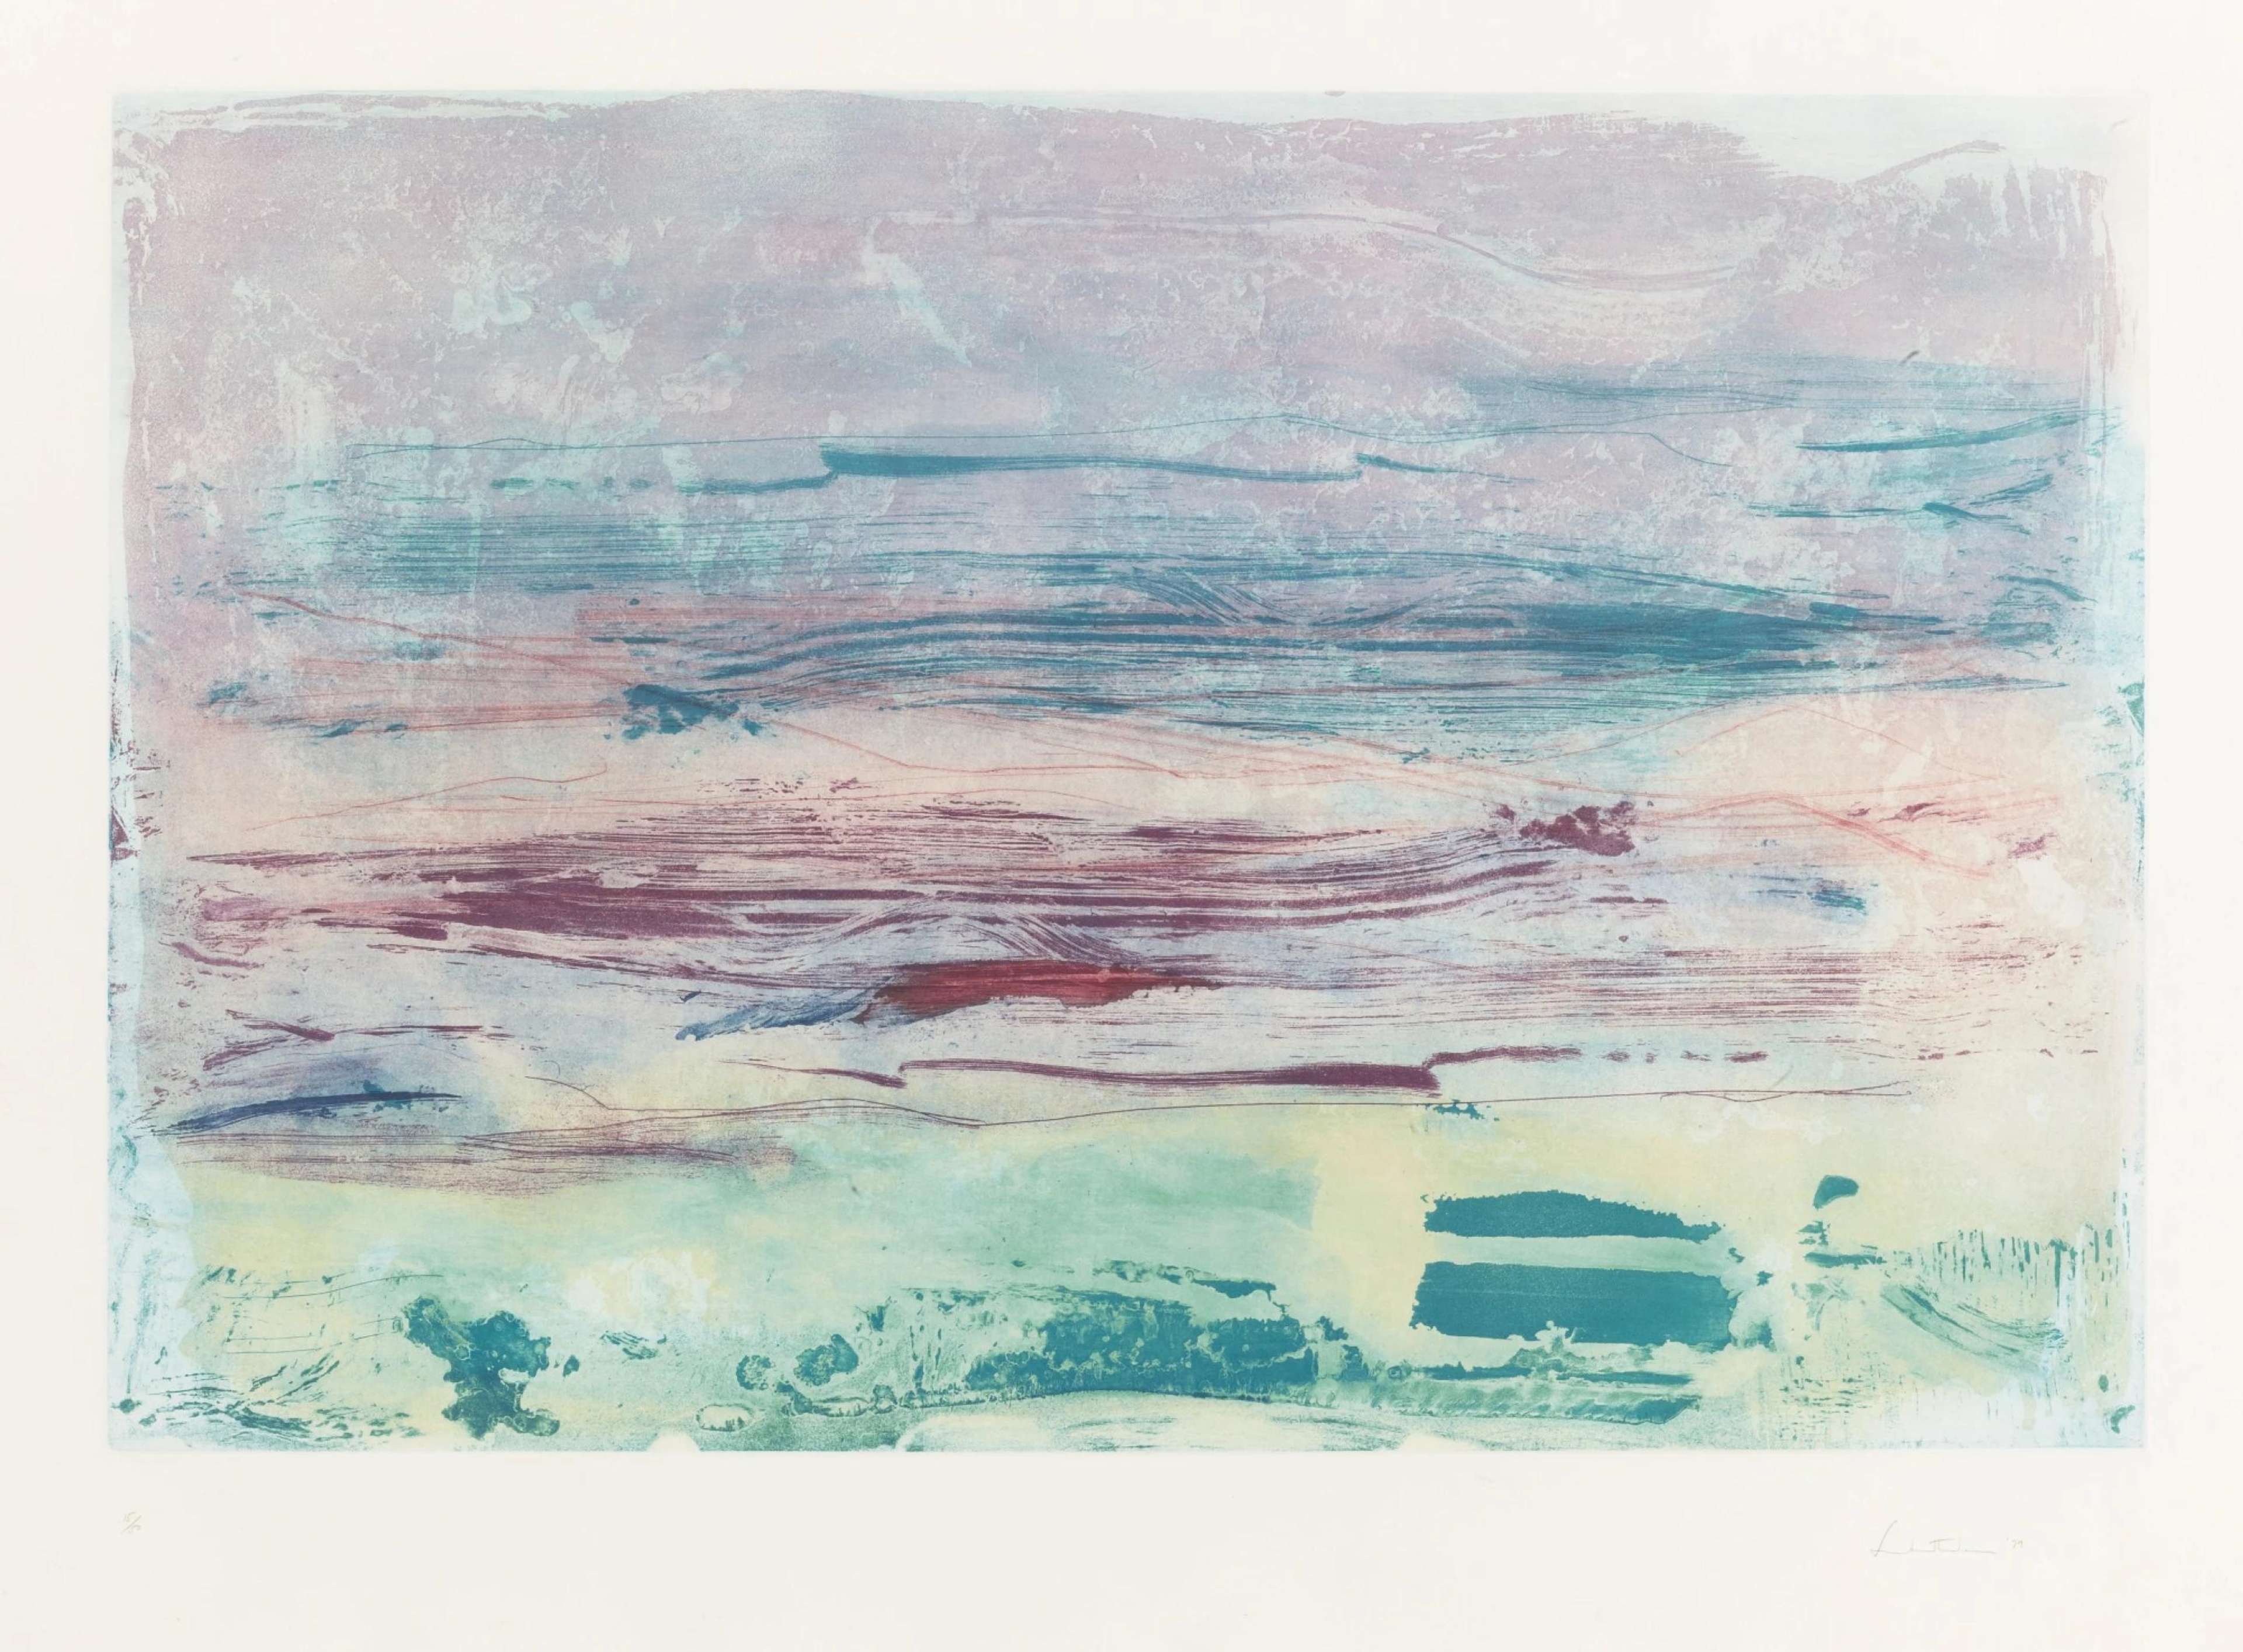 Helen Frankenthaler’s Sure Violet. An abstract expressionist intaglio print of a mountain-like landscape.